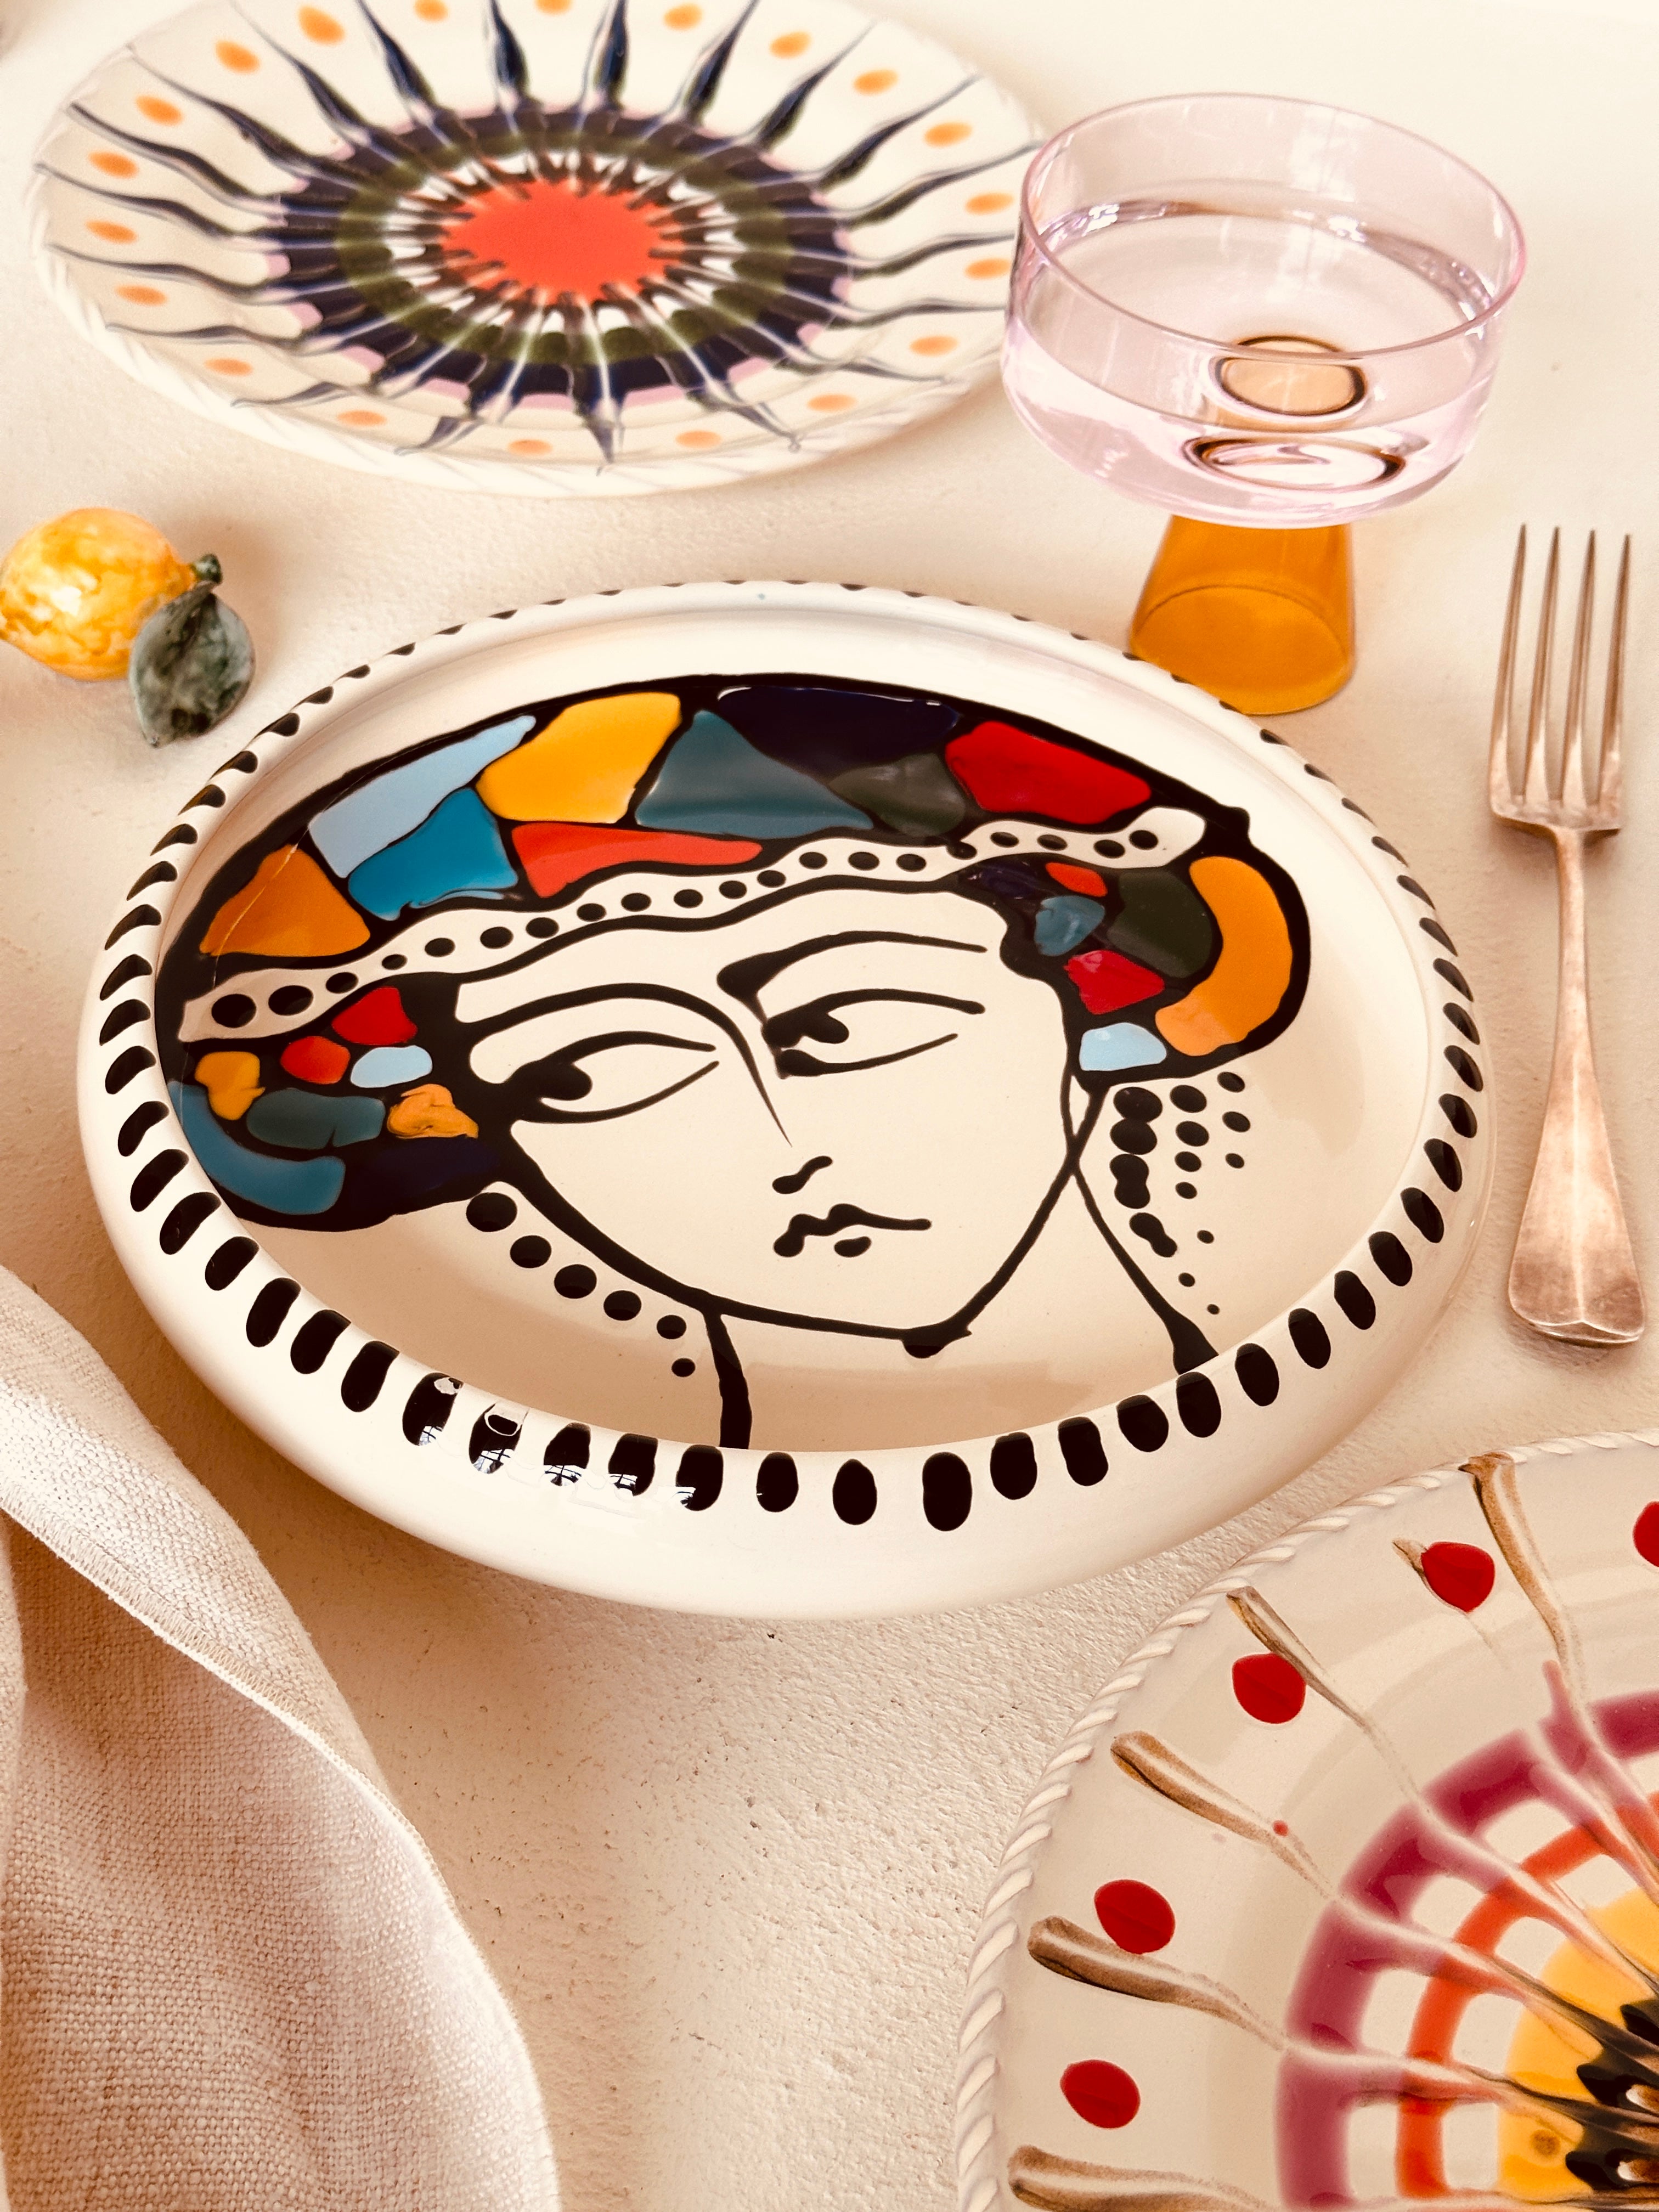 Viso Frisbee Plate "PICASSO inspired Unique Master Piece 1965“